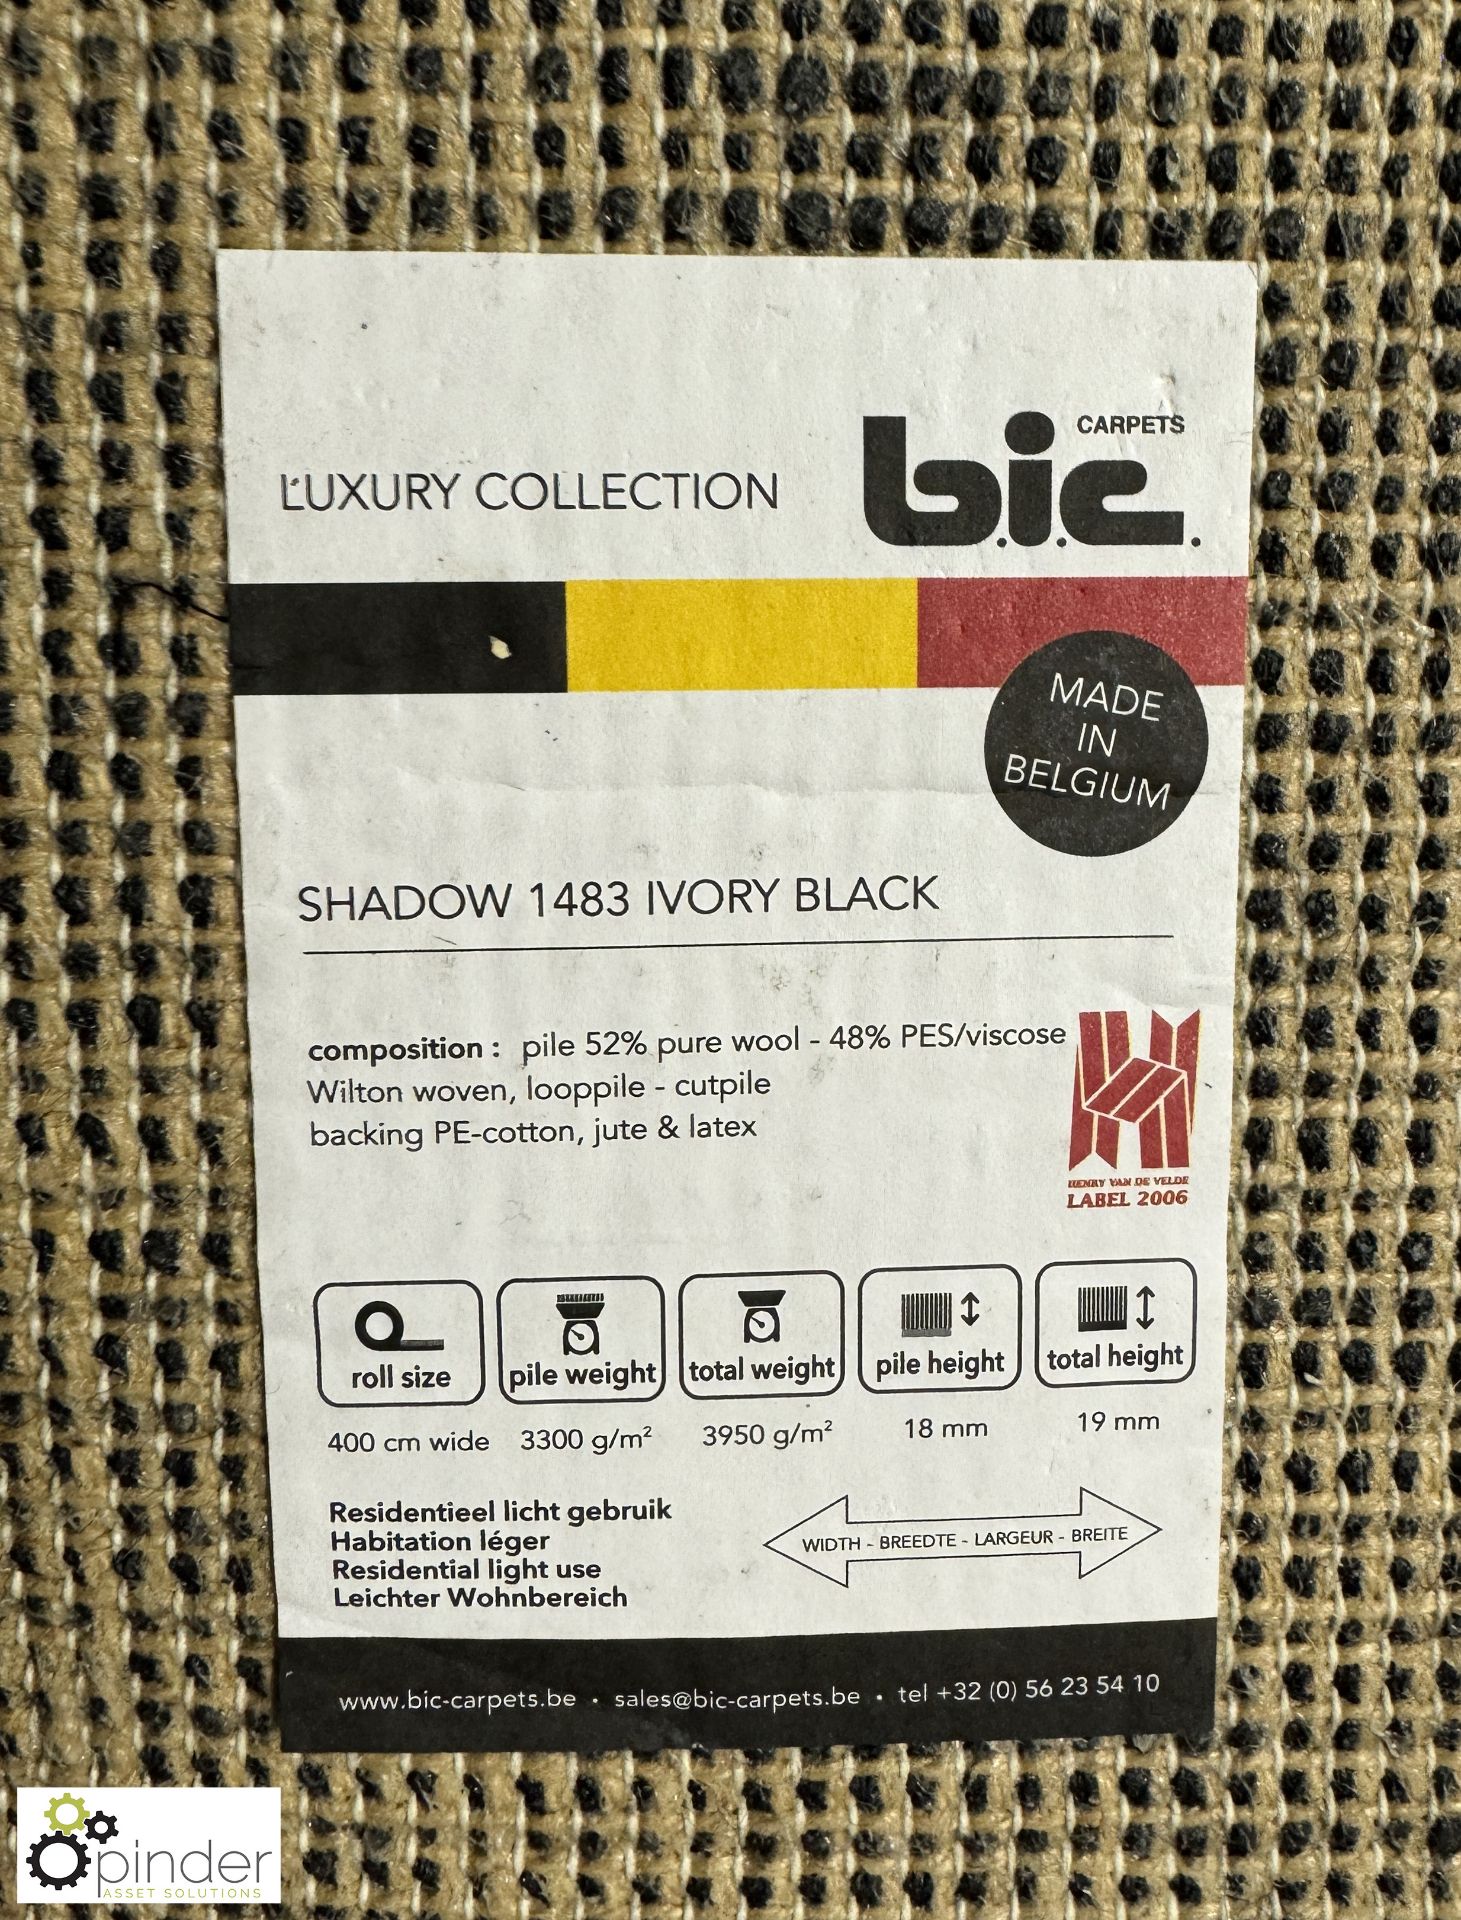 BIC Luxury Rug “Shadow 1483 Ivory Black”, 6450mm x 4000mm (location in building – level 22) - Image 3 of 5